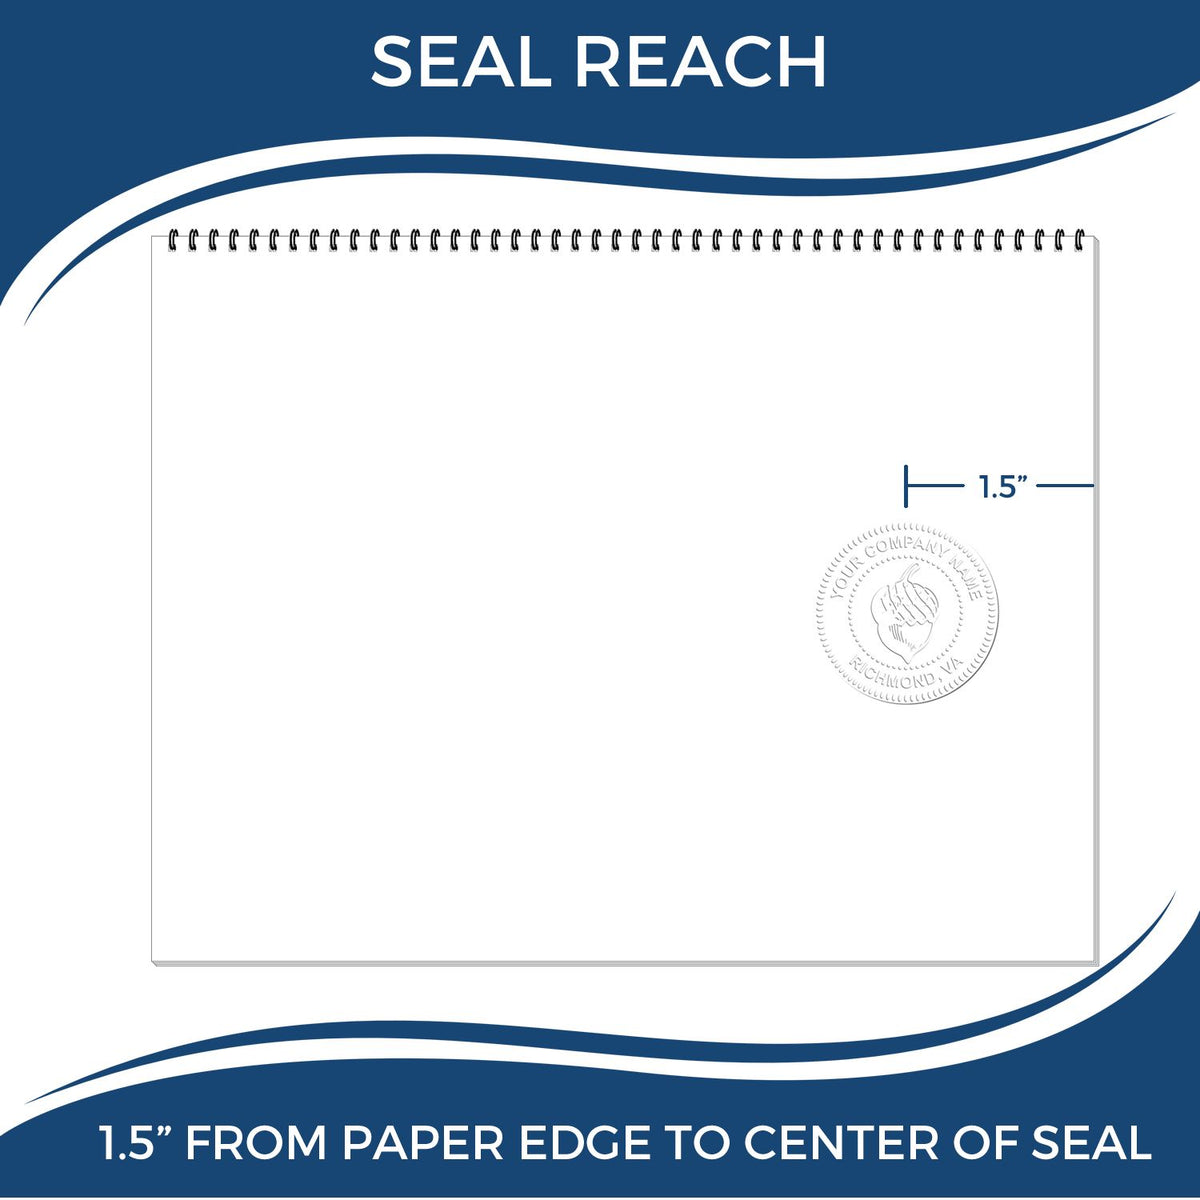 An infographic showing the seal reach which is represented by a ruler and a miniature seal image of the Handheld Hawaii Professional Engineer Embosser